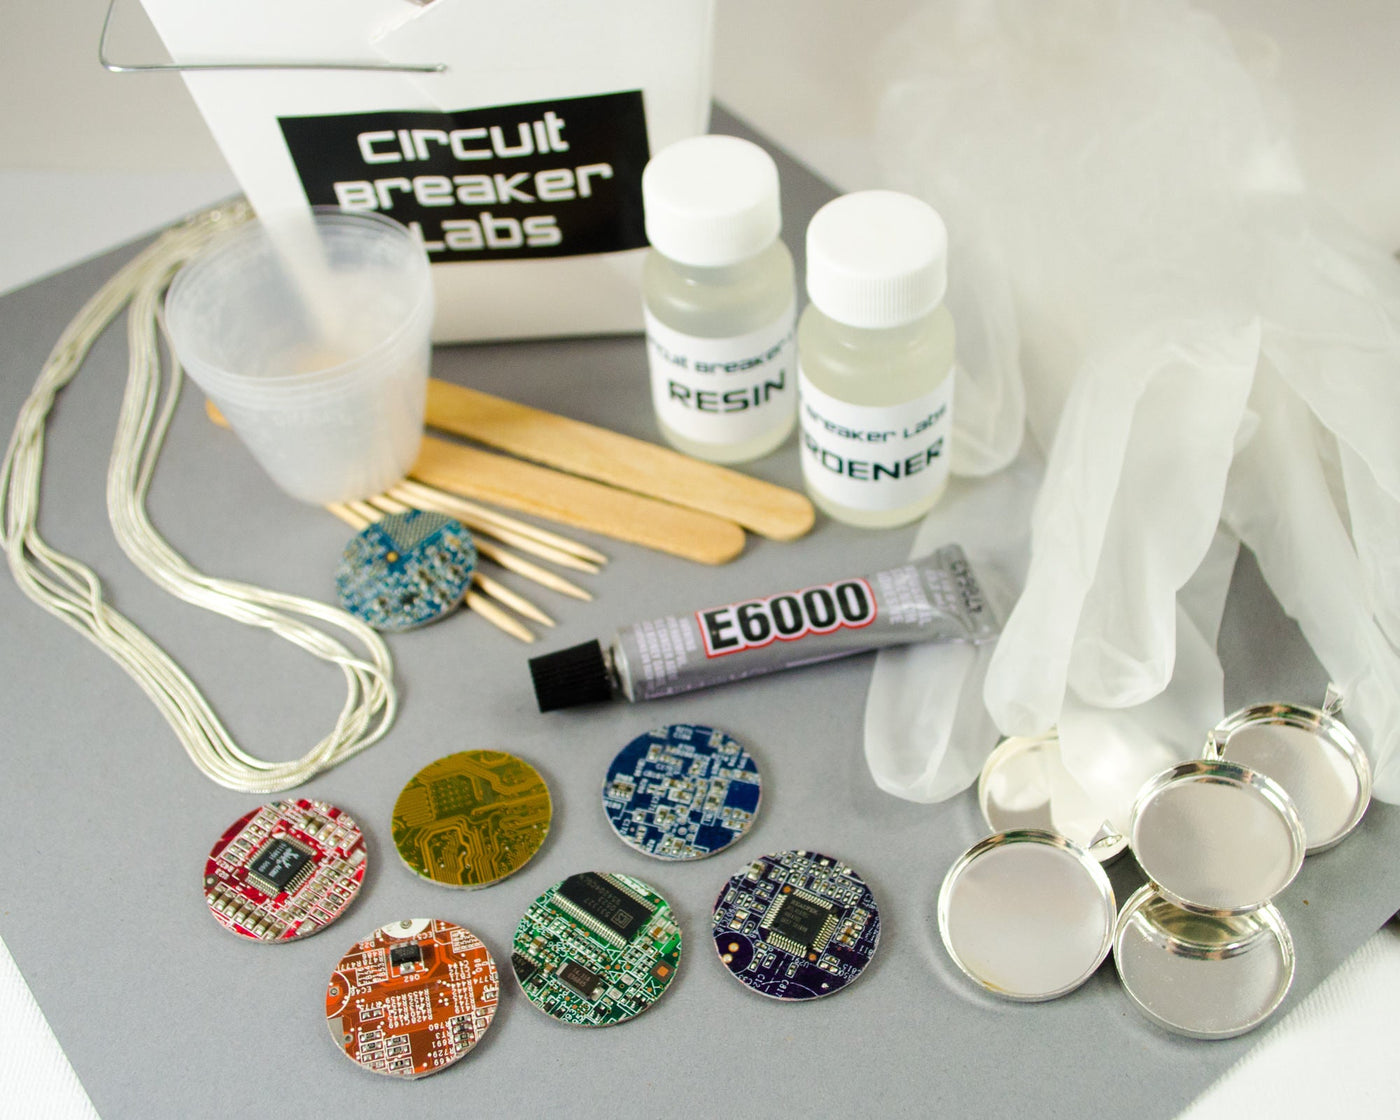 DIY kit to make your own circuit board and resin necklaces